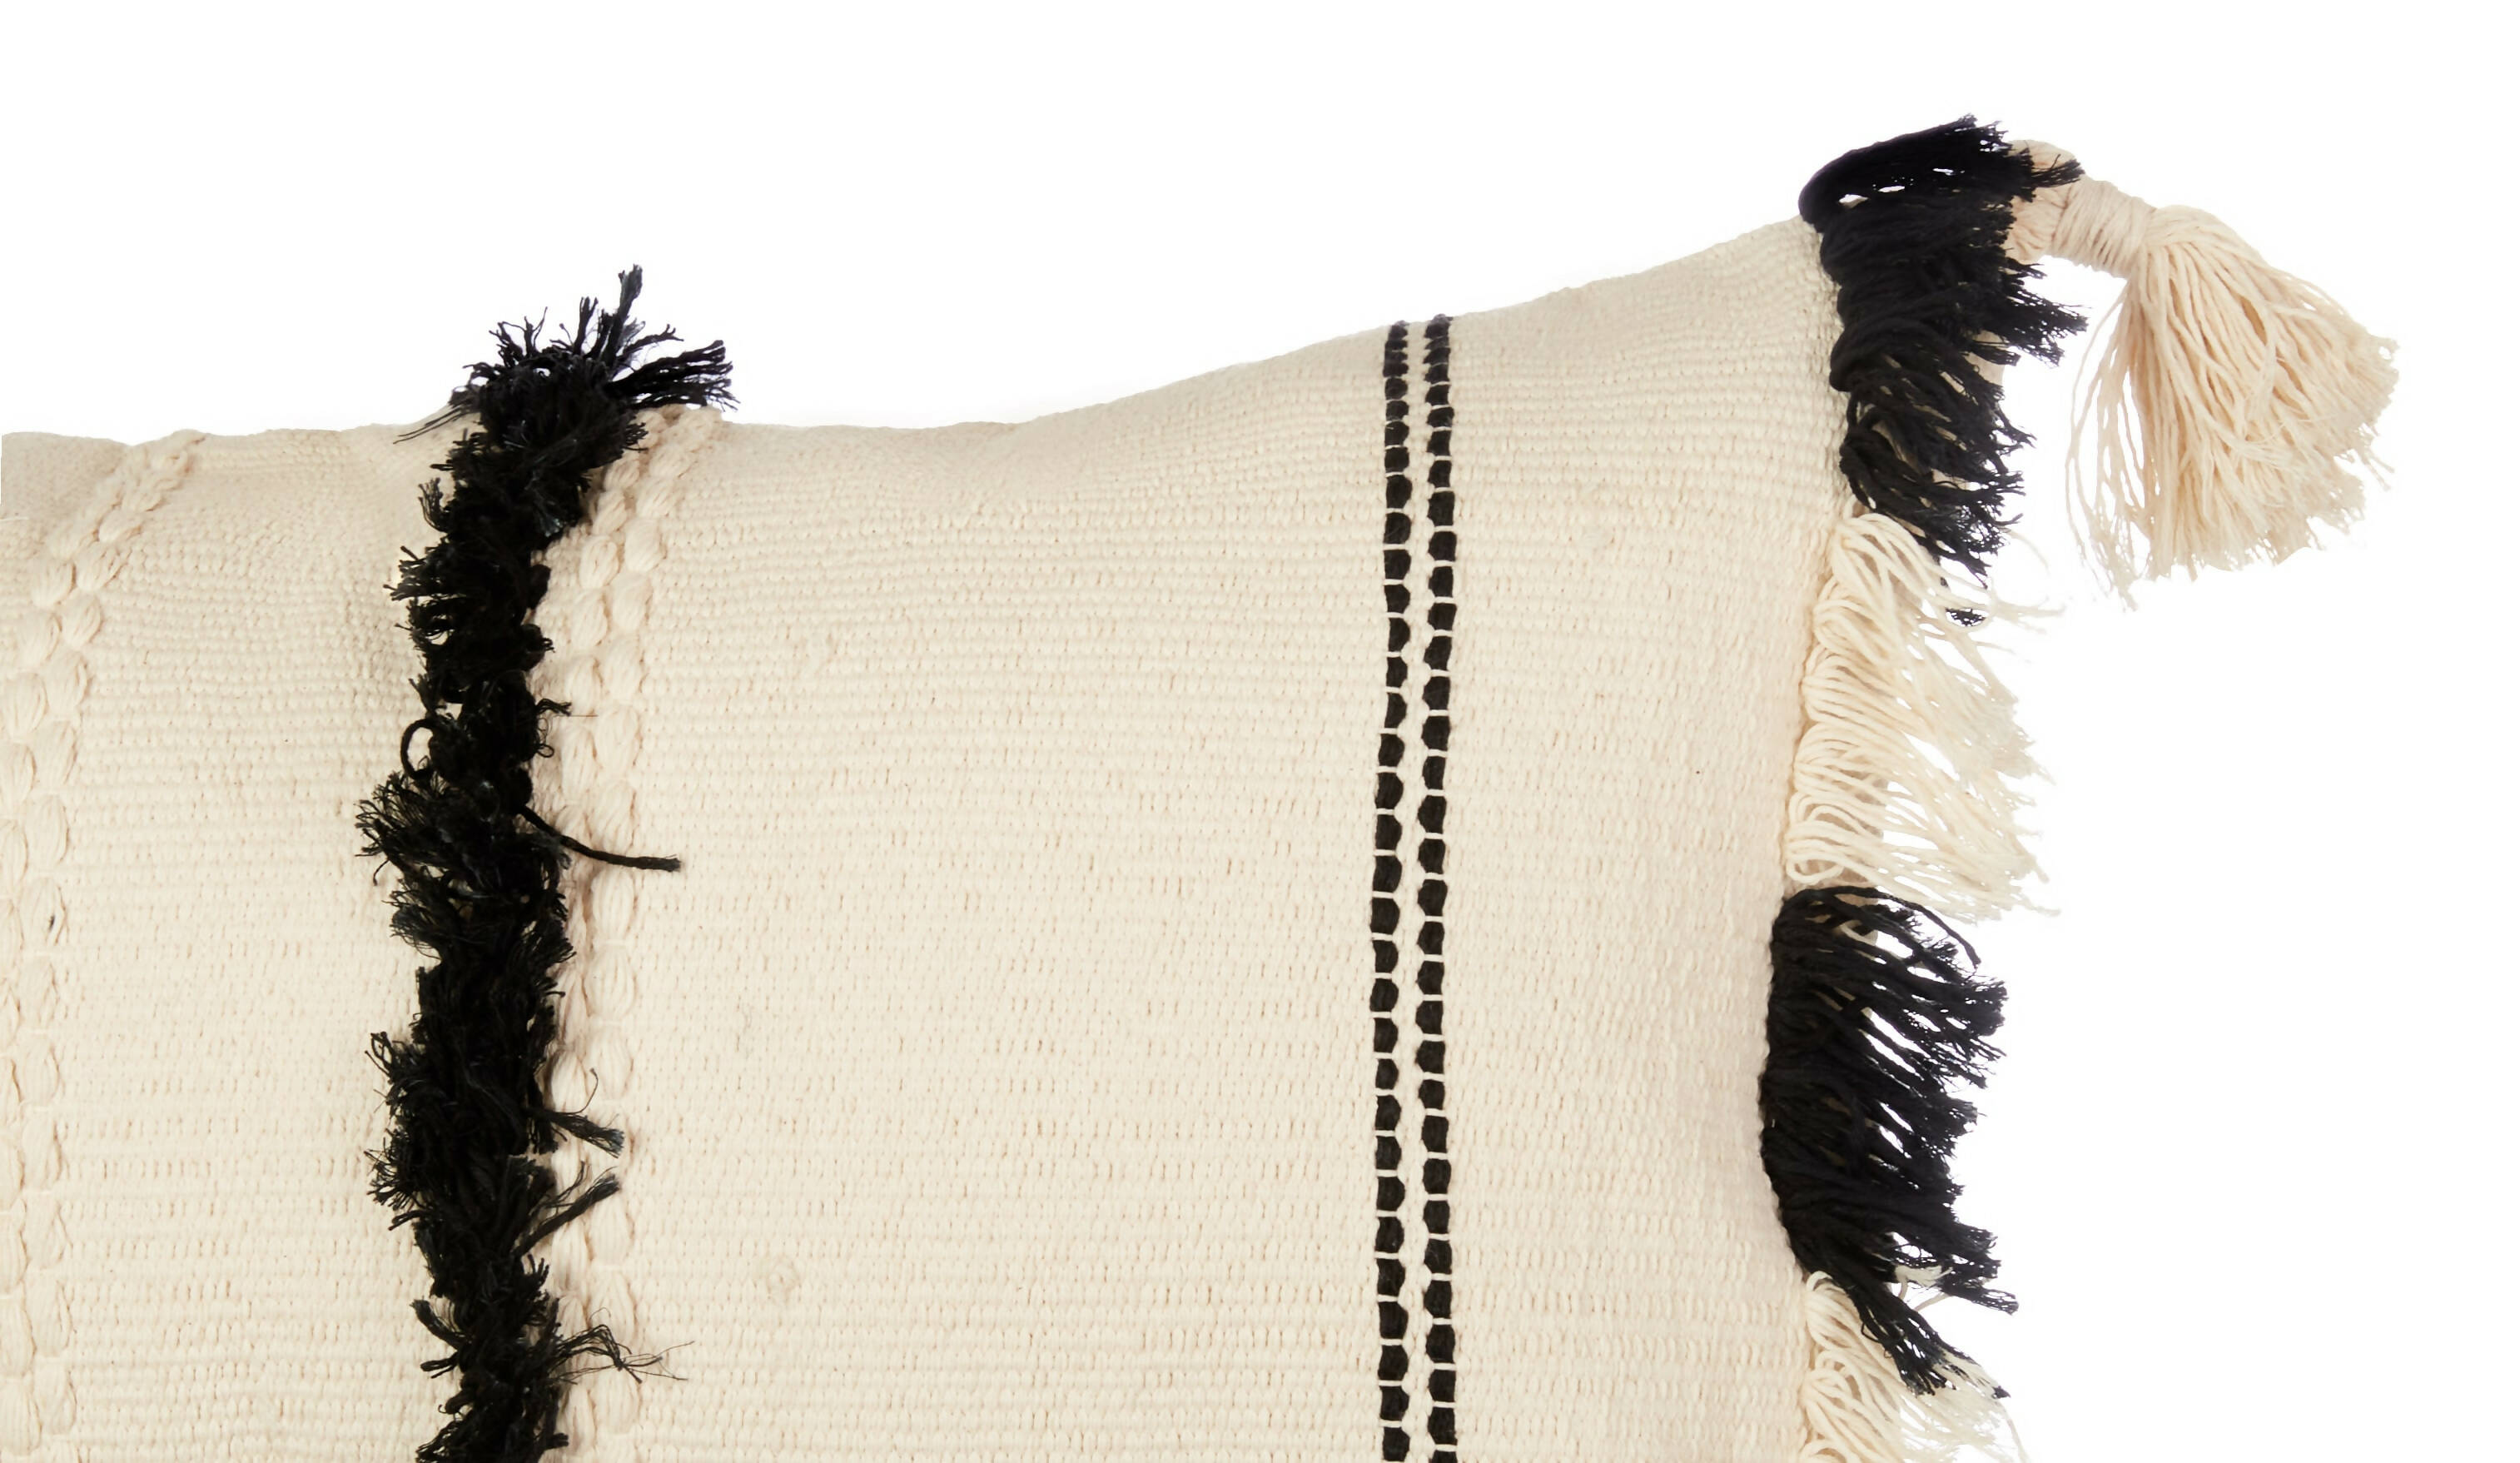 Black and White Tufted Cushion